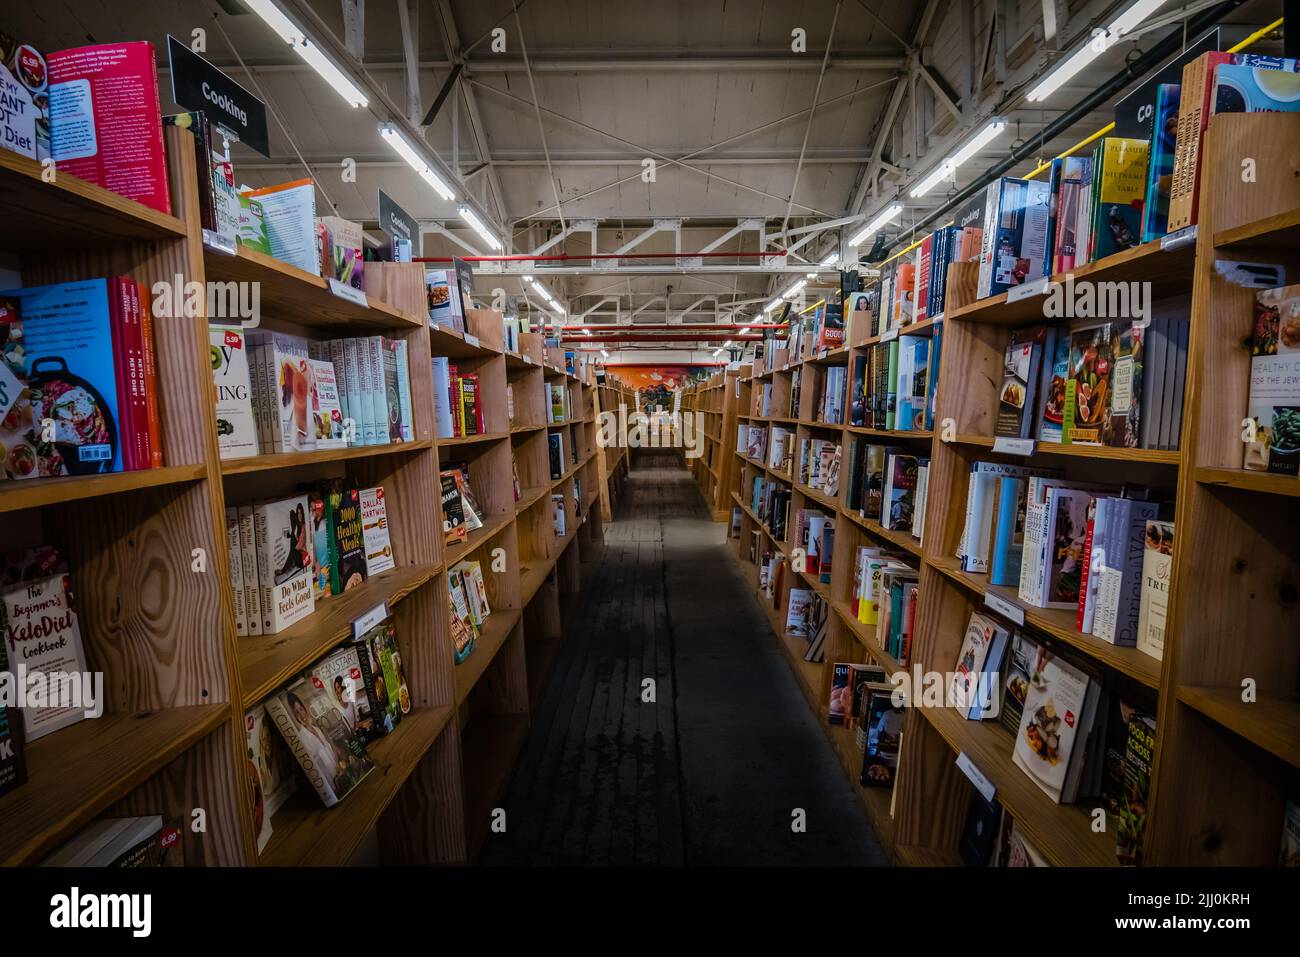 short bookshelves on both sides of an aisle inside an unfurnished bookstore Stock Photo